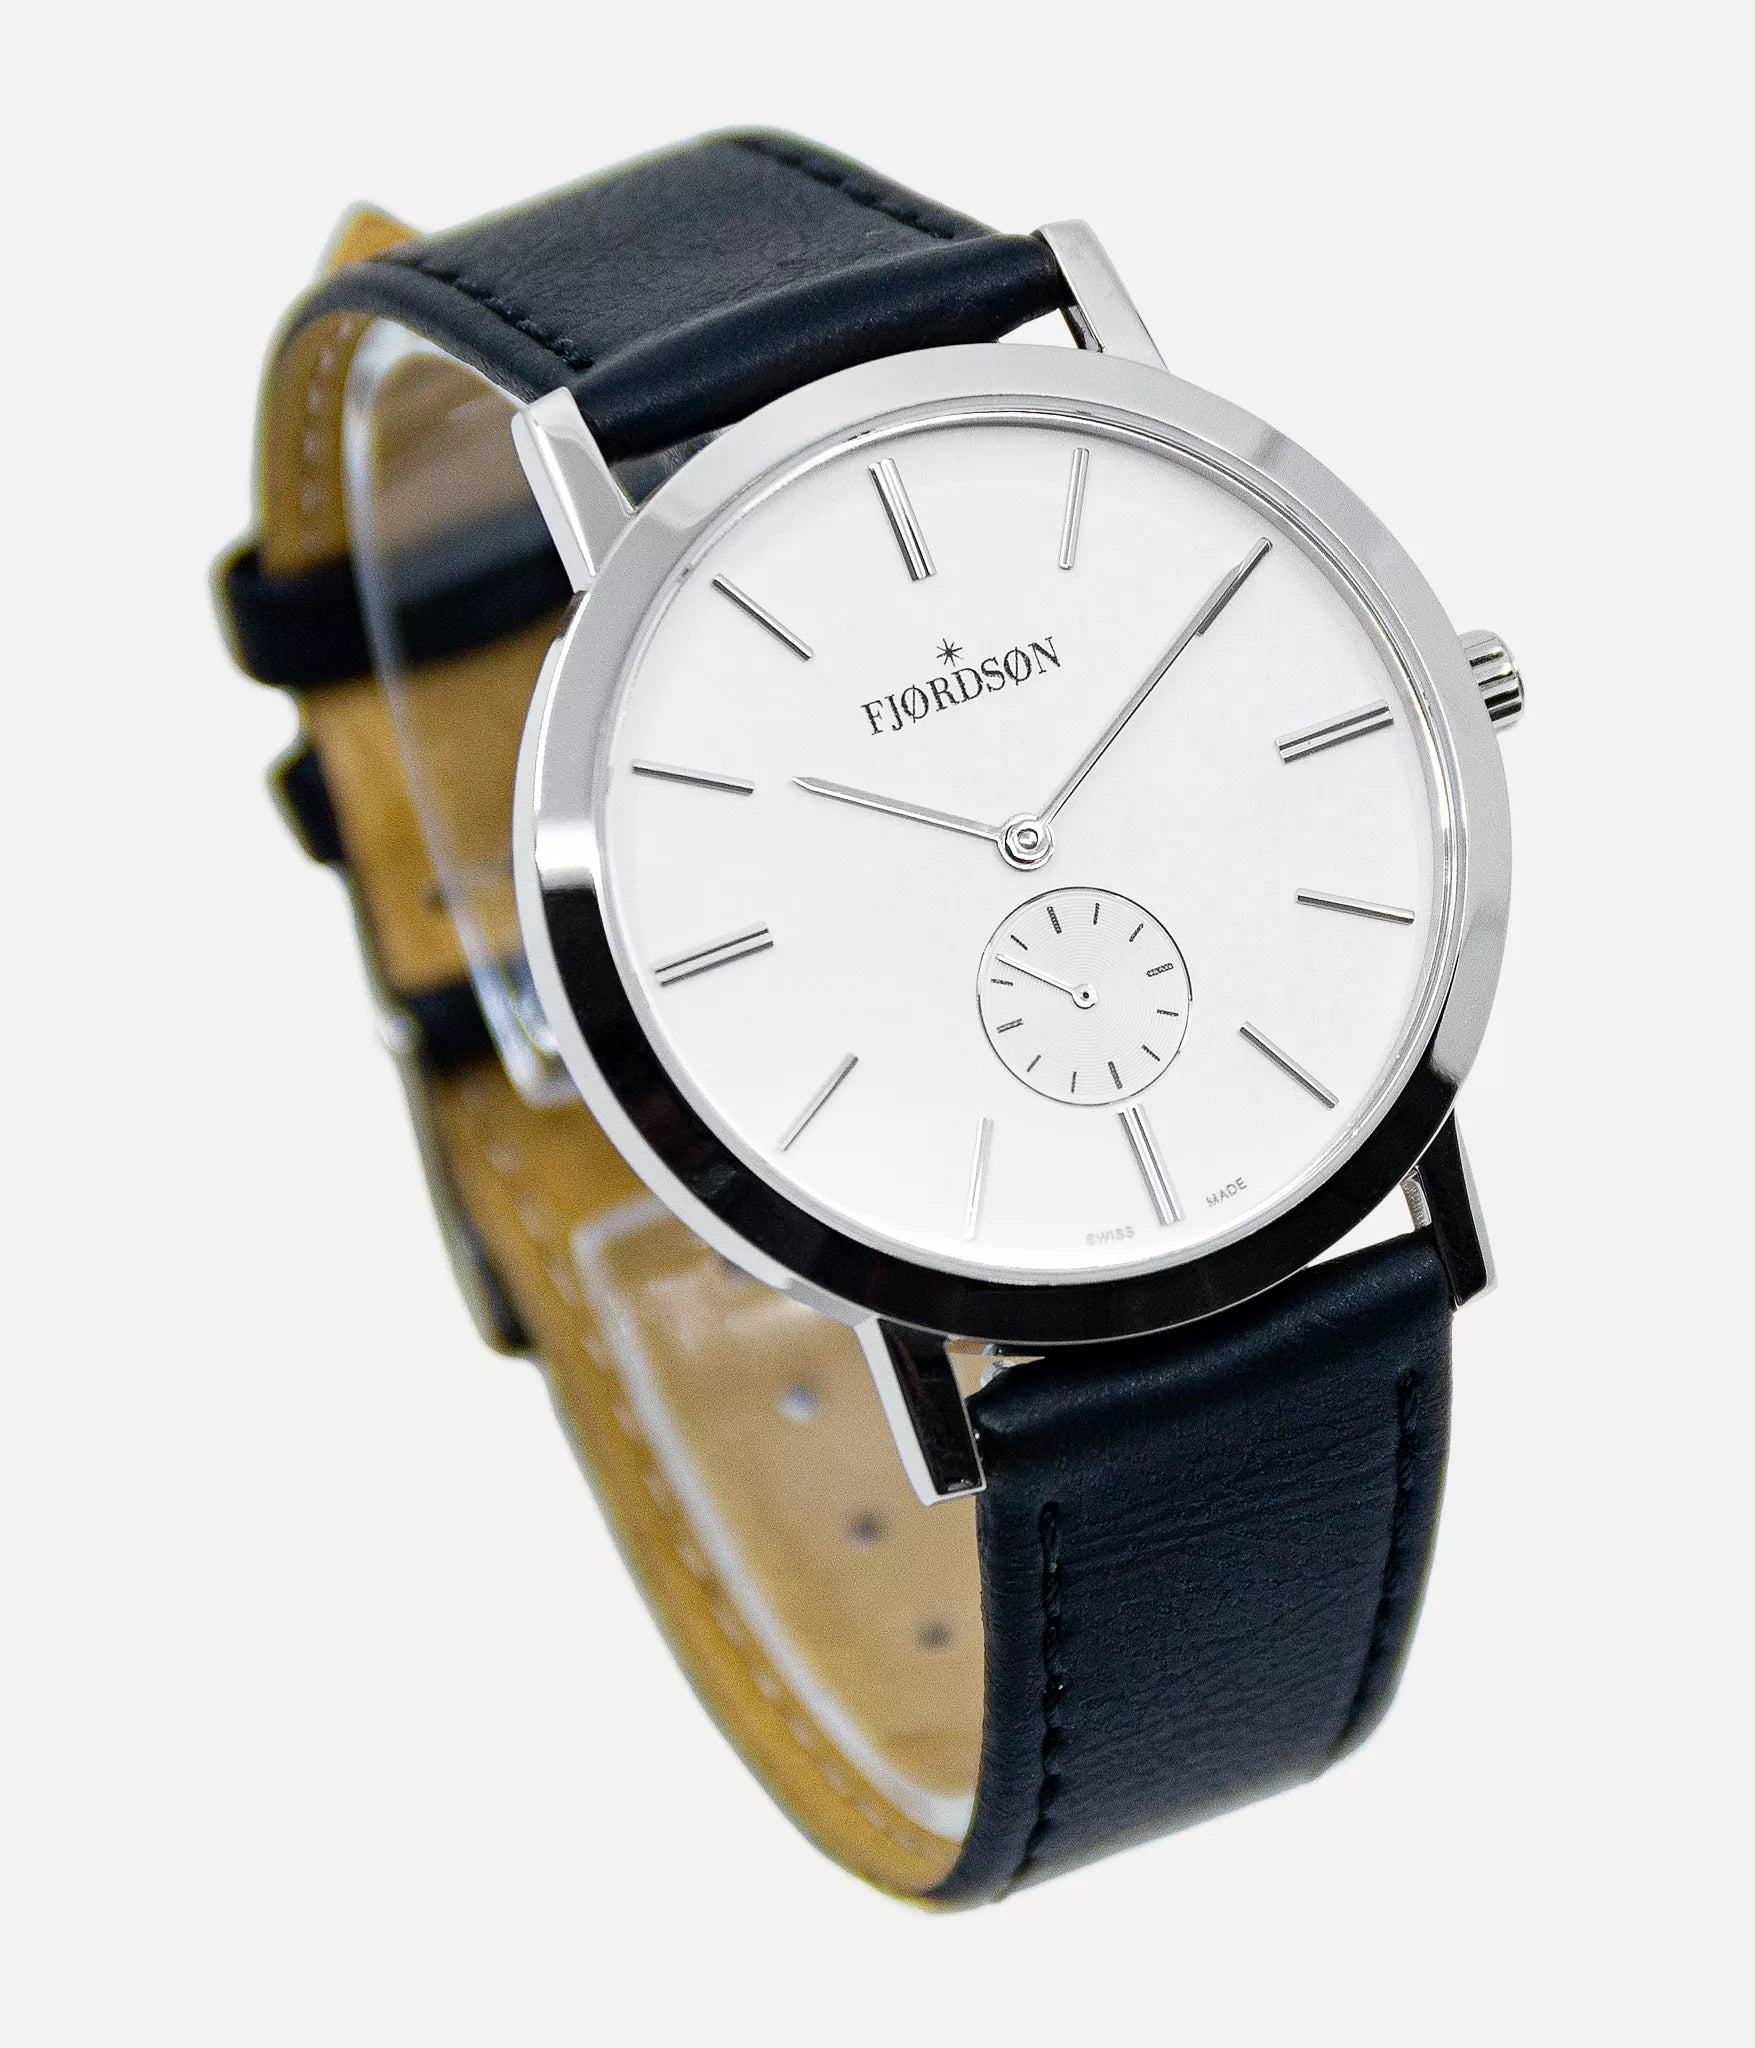 Side shot - Fjordson watch with white dial and black vegan leather watch strap - UNISEX - vegan & approved by PETA - Swiss made